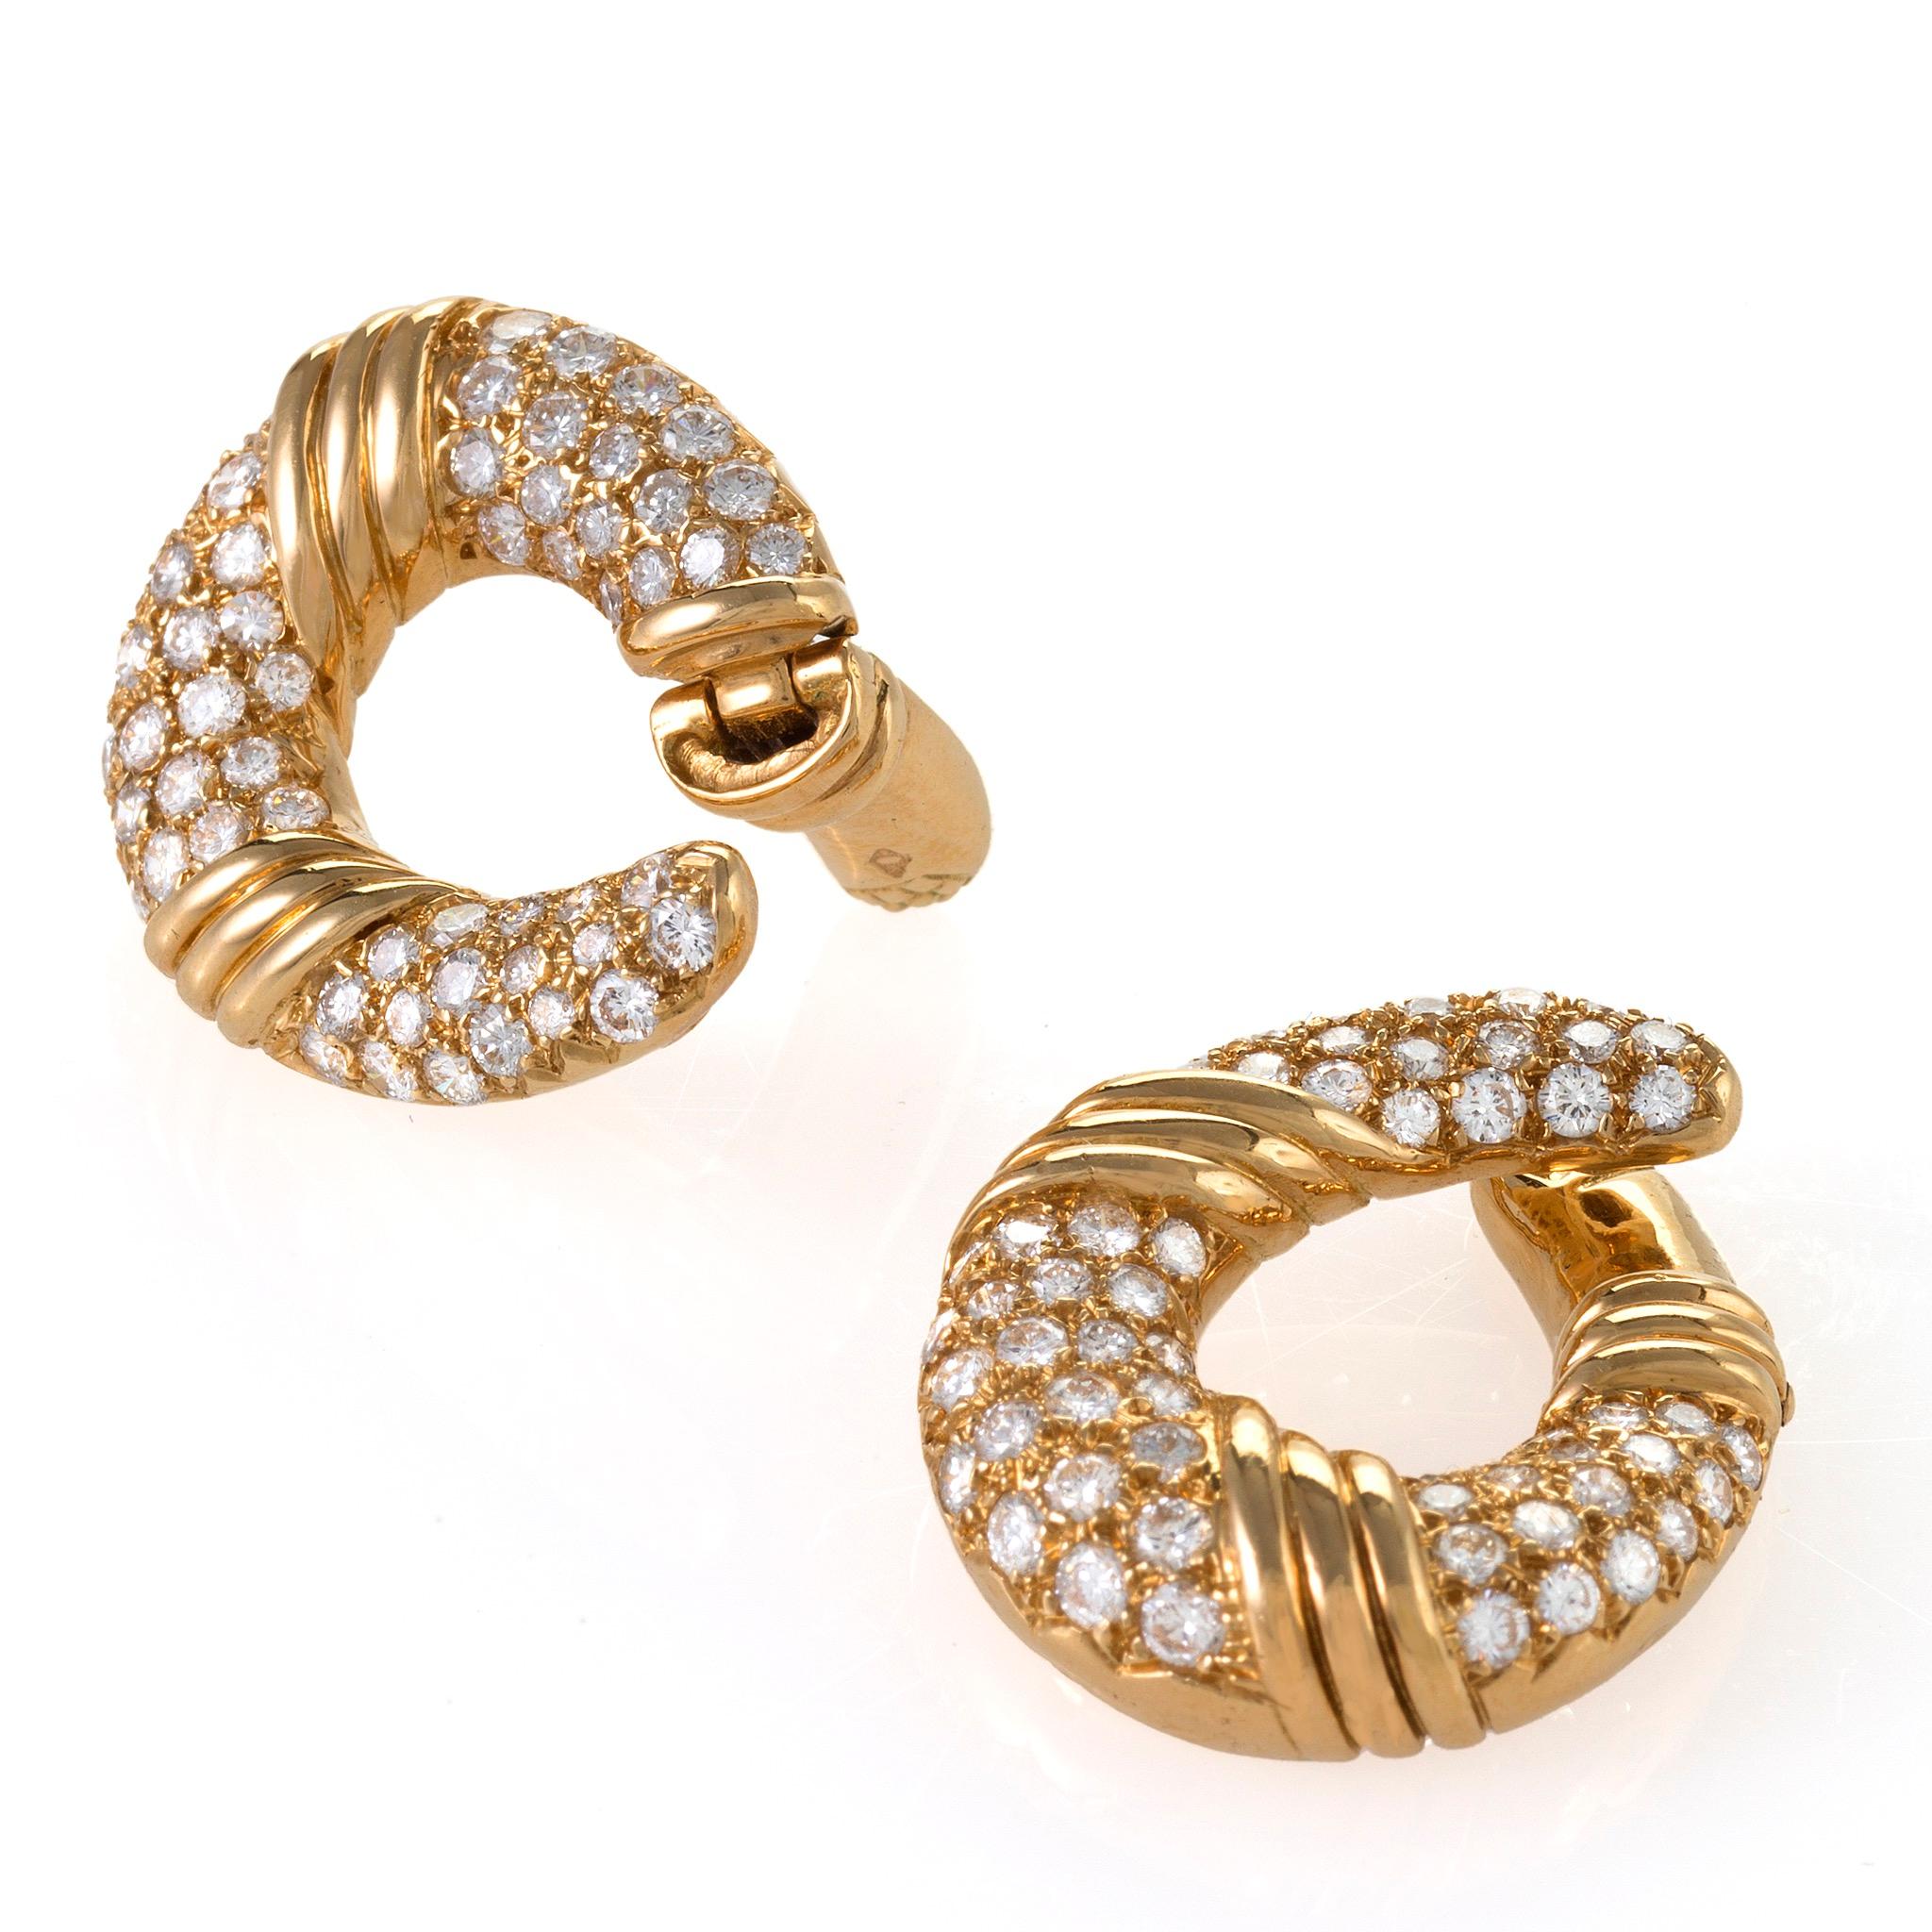 Dating from the 1960s, these Van Cleef & Arpels Paris hoop clipback earrings are composed of diamonds mounted in gold. Each earring is pave-set with round brilliant-cut diamonds, accented by polished gold triple arched bands. Ideally modeled to